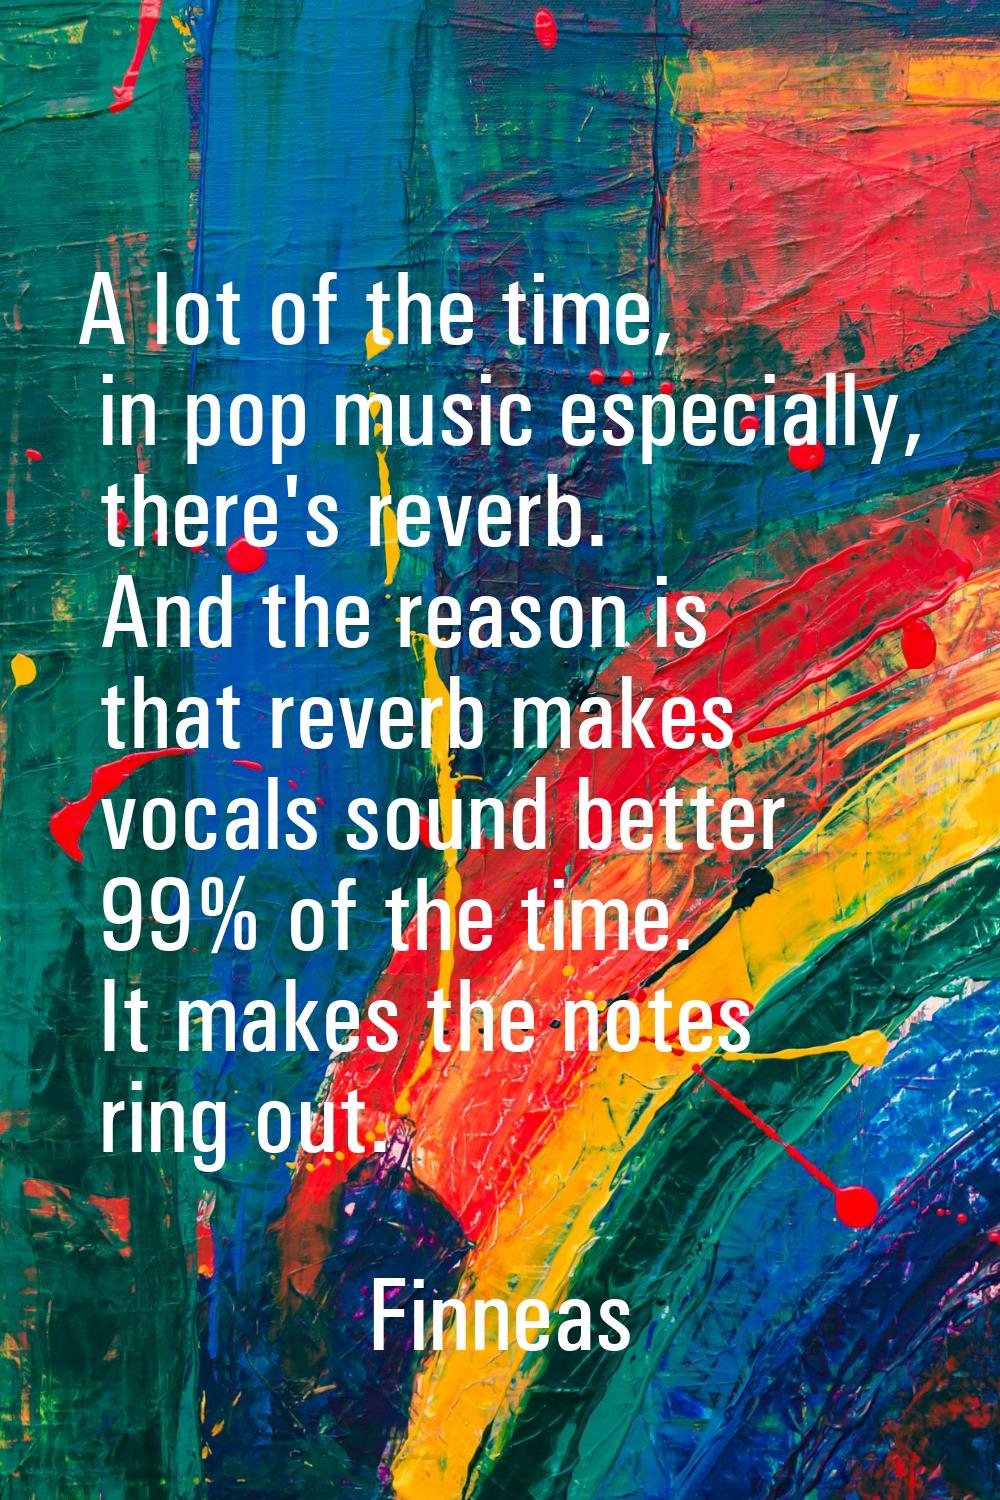 A lot of the time, in pop music especially, there's reverb. And the reason is that reverb makes voc